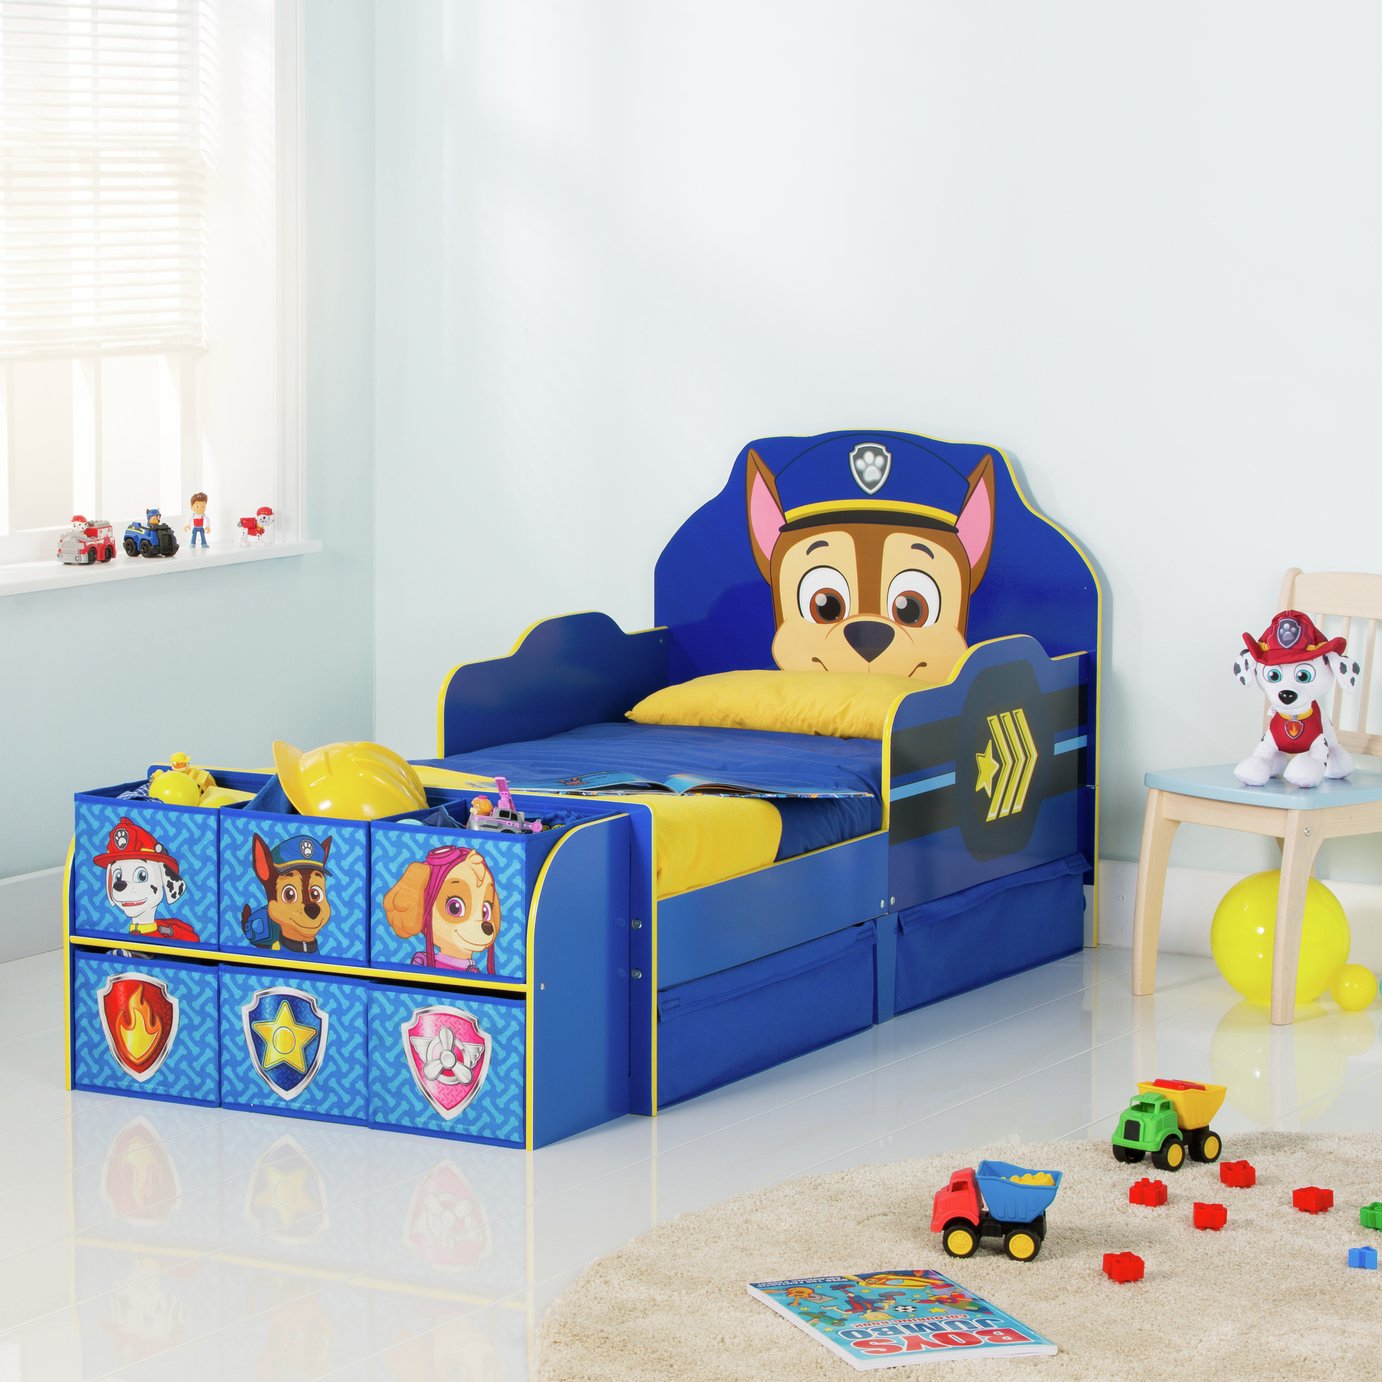 Paw Patrol Toddler Bed Cube & Mattress review